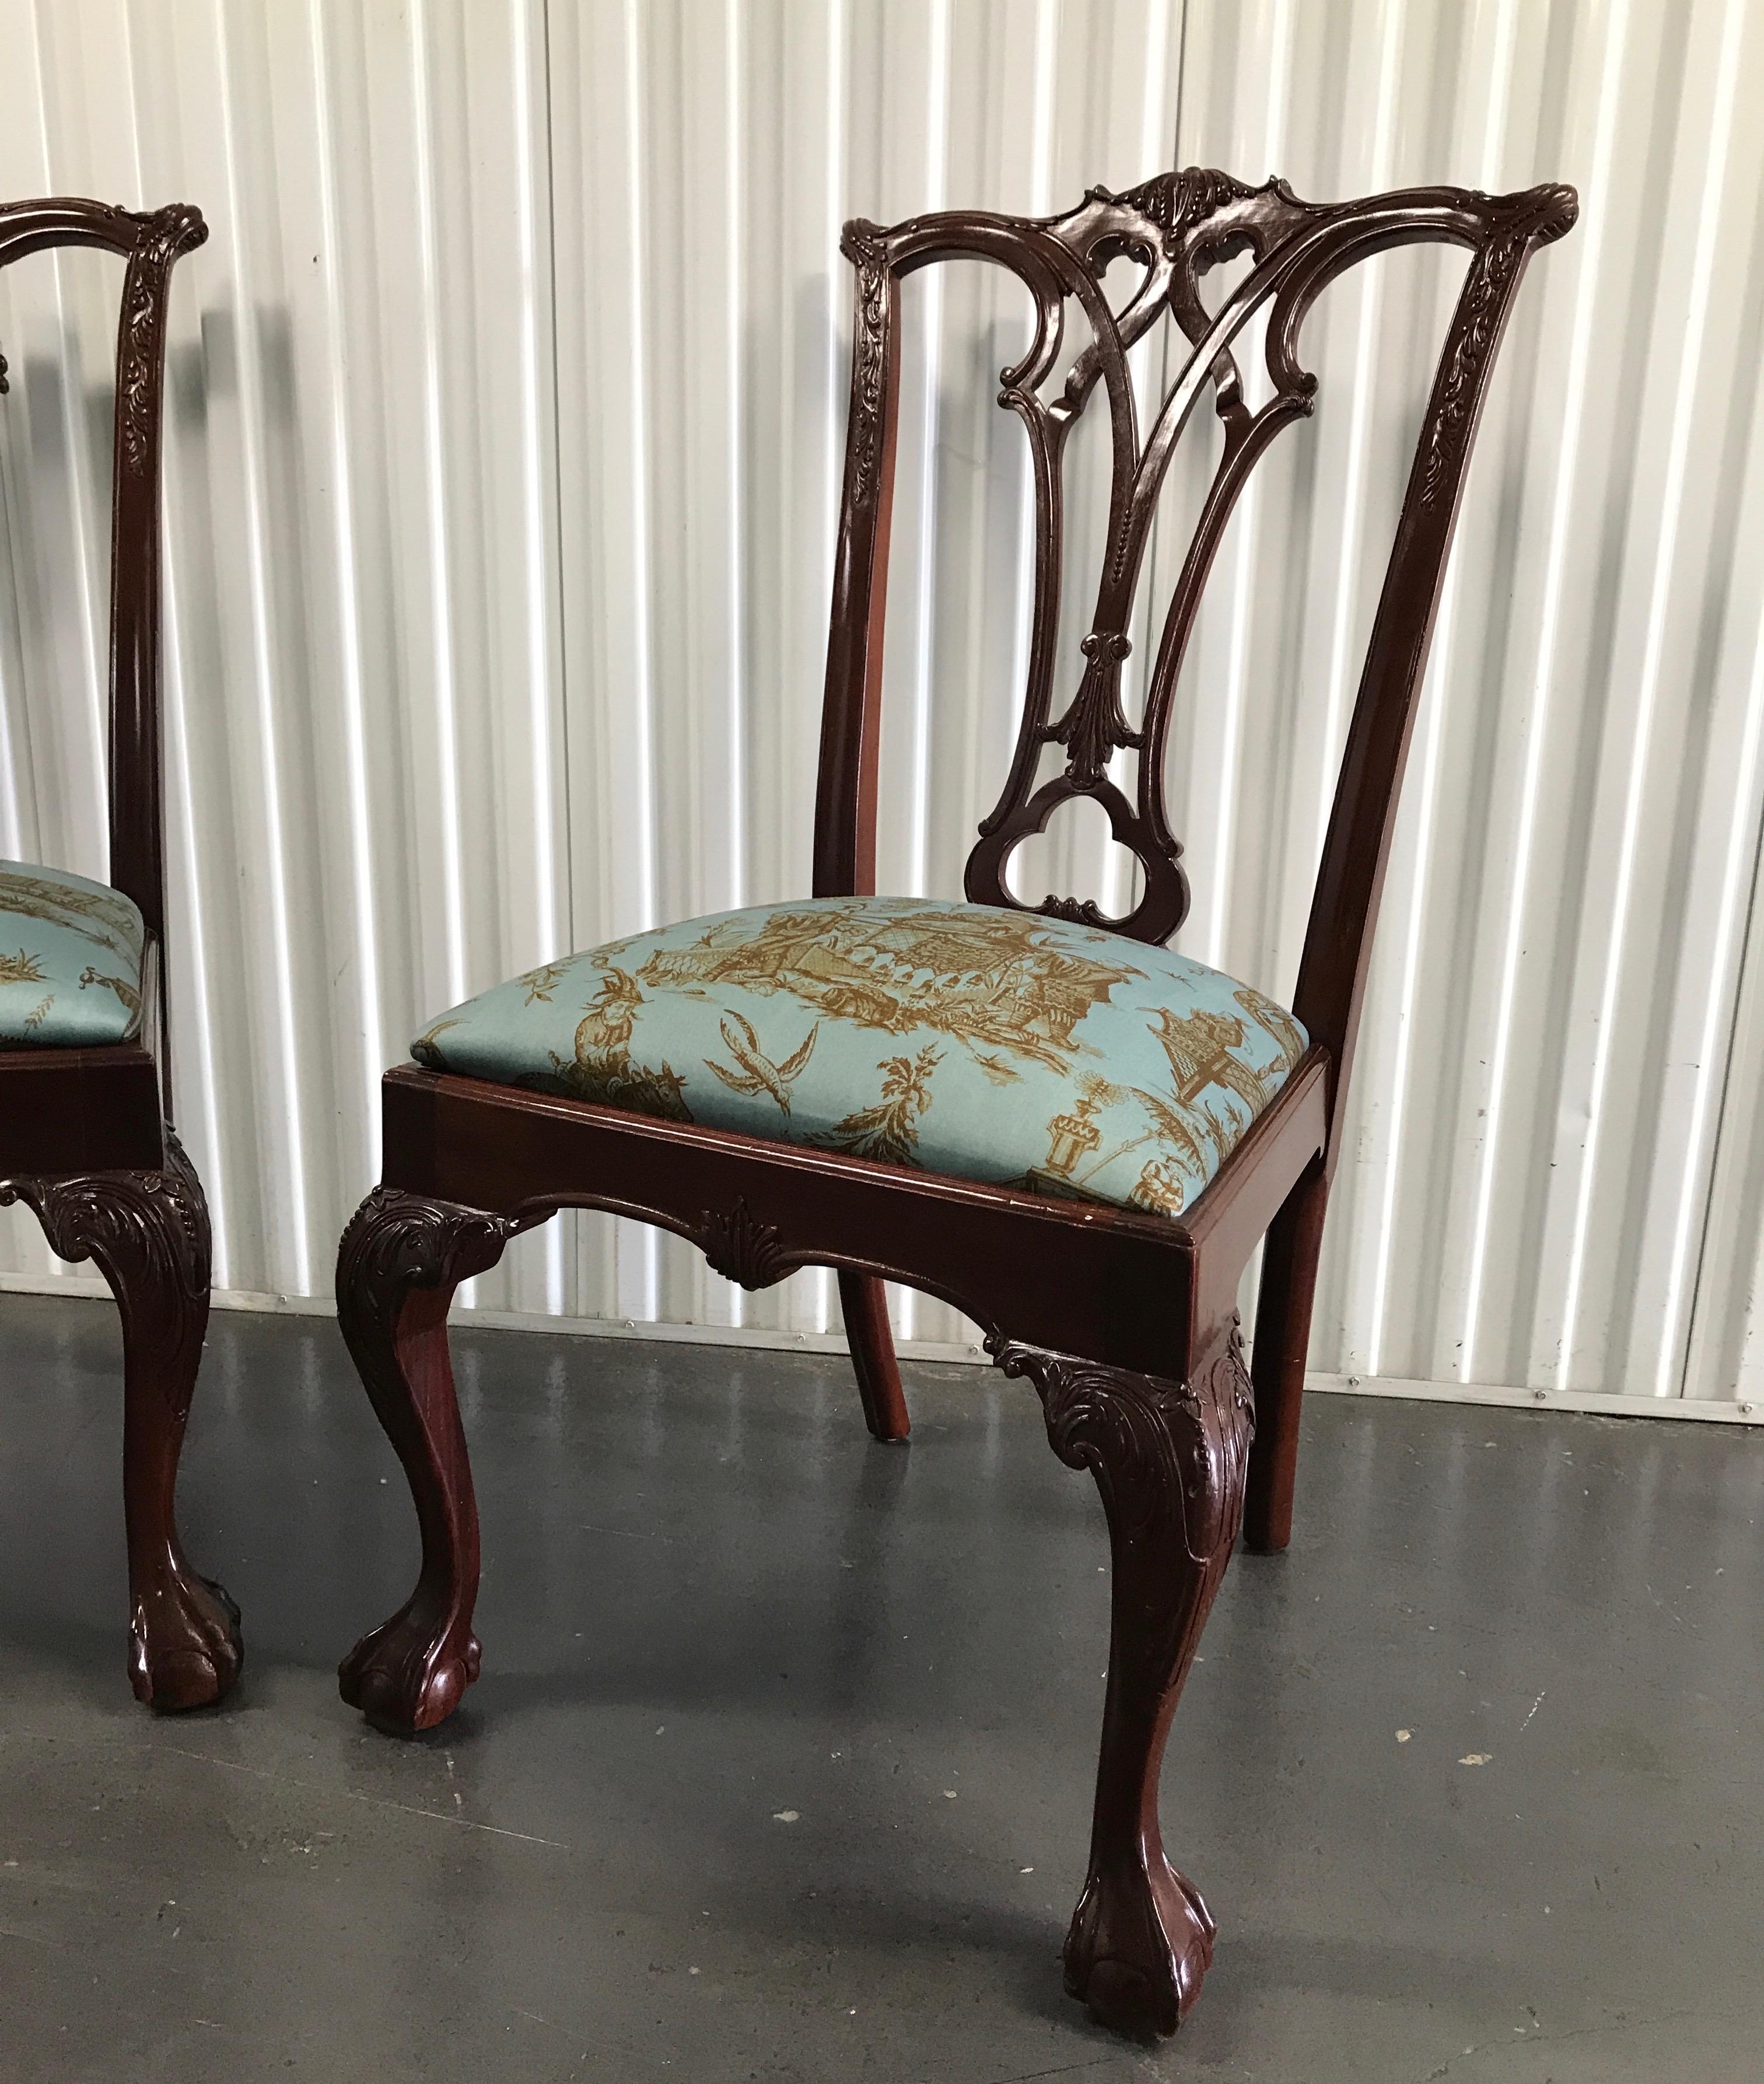 Pair of Chippendale style side chairs with chinoiserie toile fabric seats.